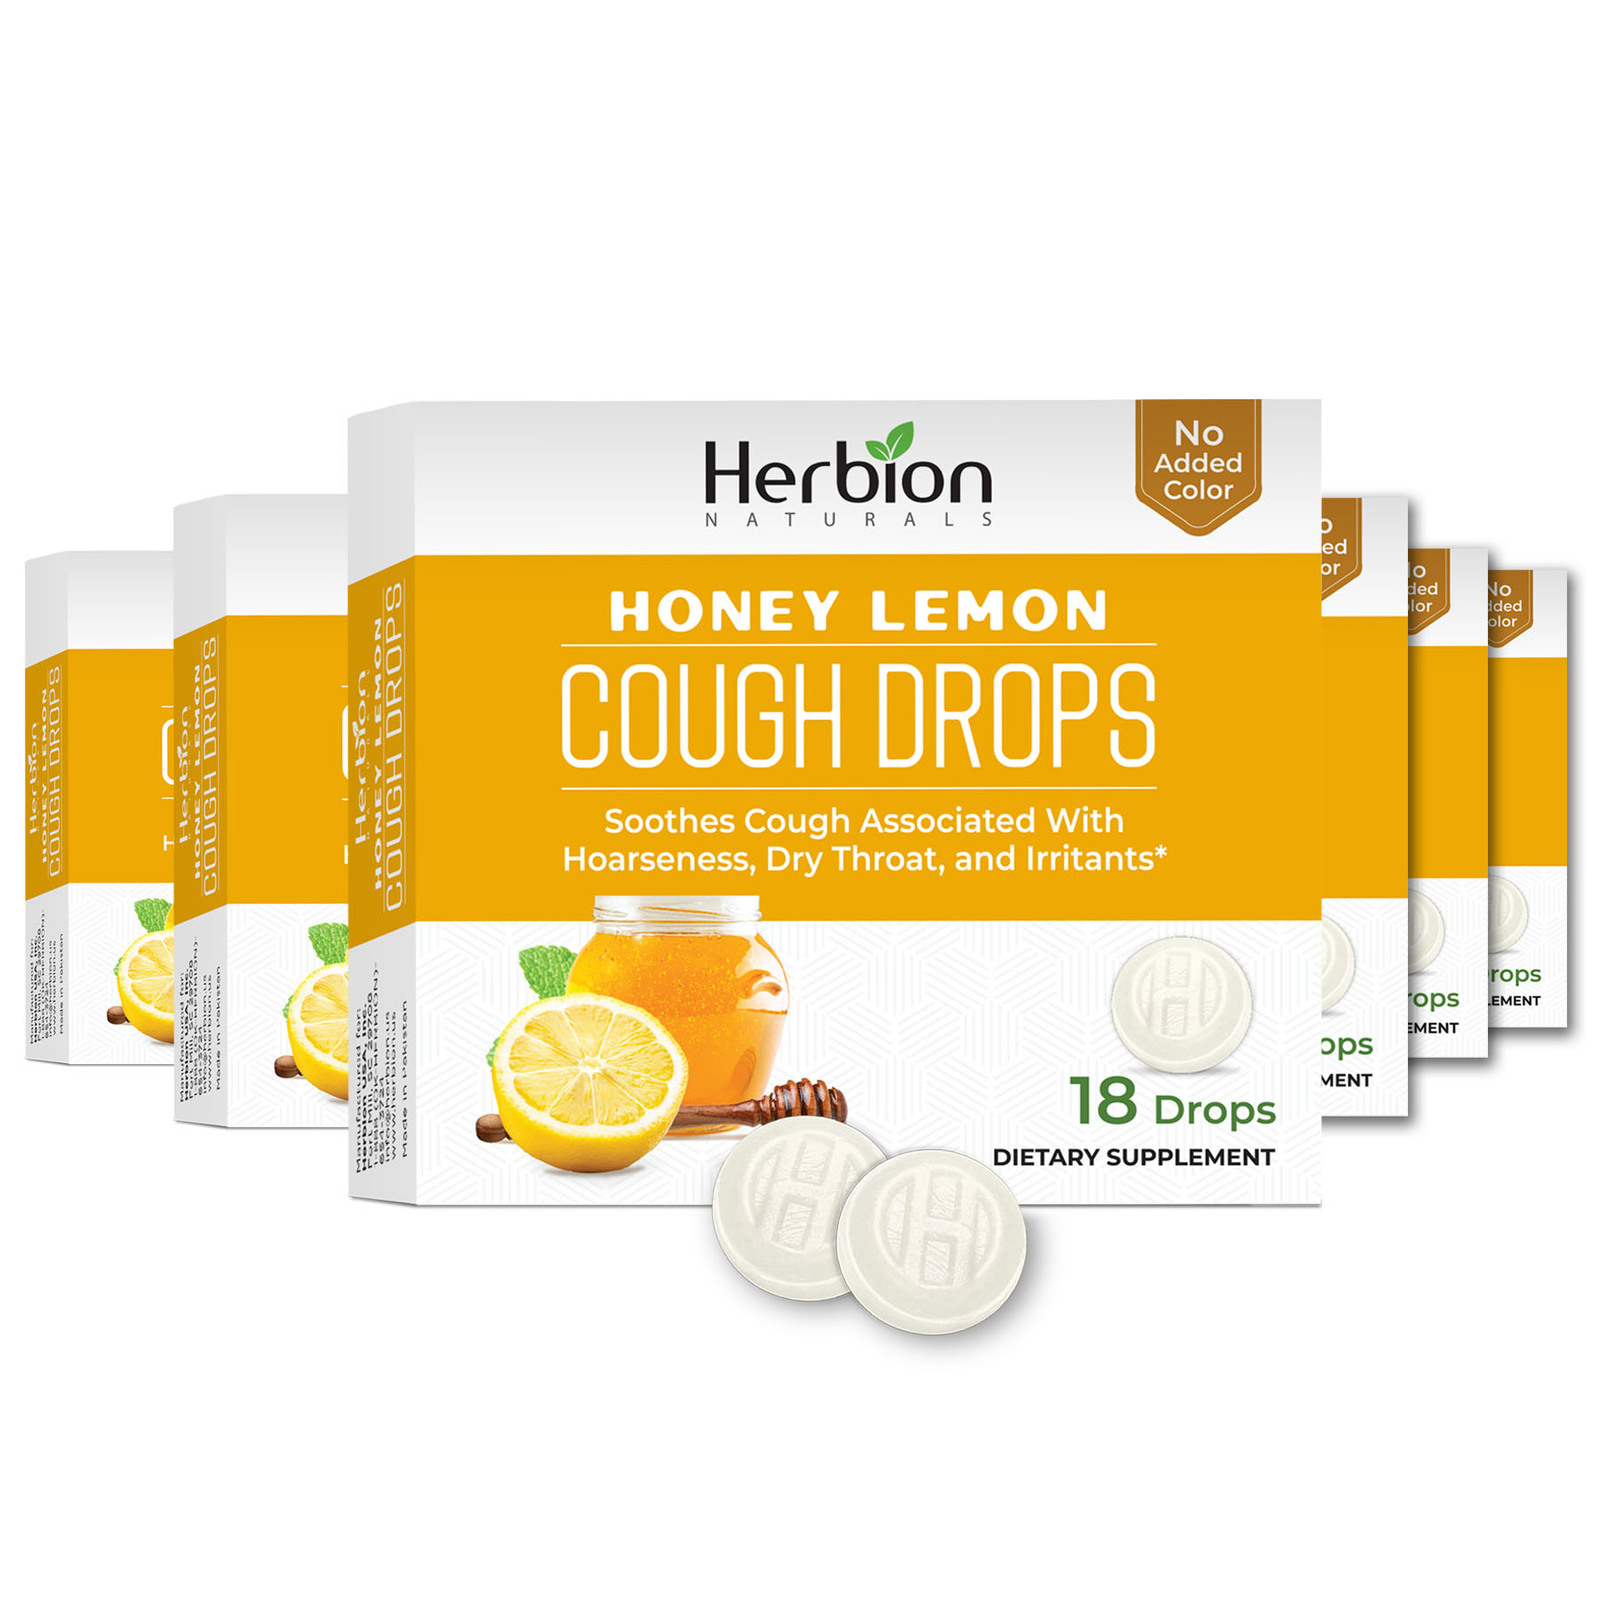 Herbion Naturals Cough Drops with Honey Lemon Flavor, Soothes Cough - Pack of 6 - $18.99